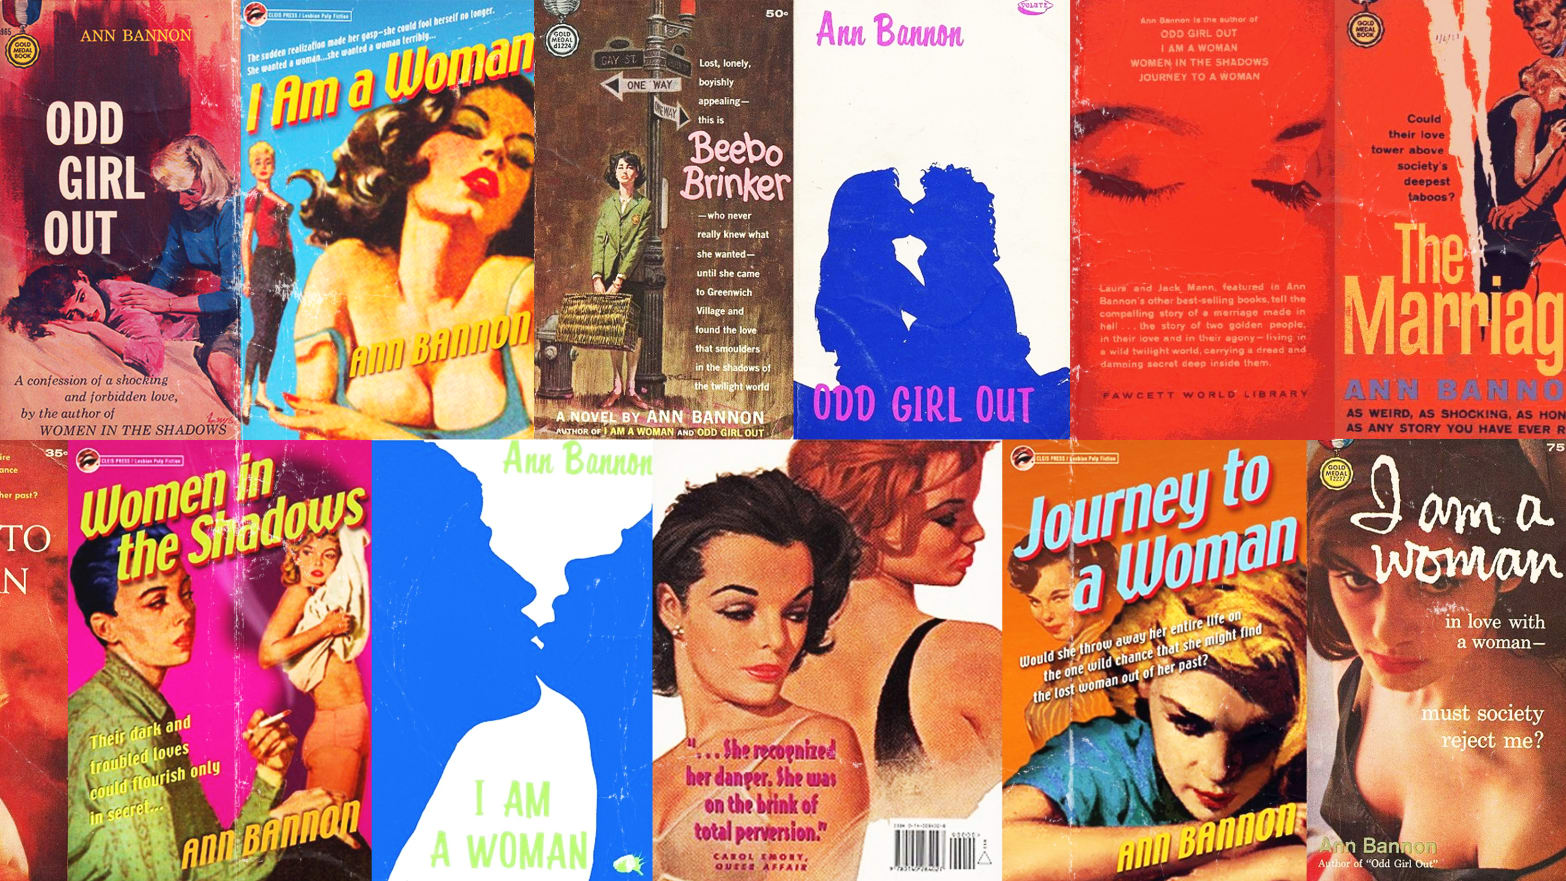 Ann Bannon, the Queen of Lesbian Pulp Fiction, Reveals Her Own Amazing Story image photo